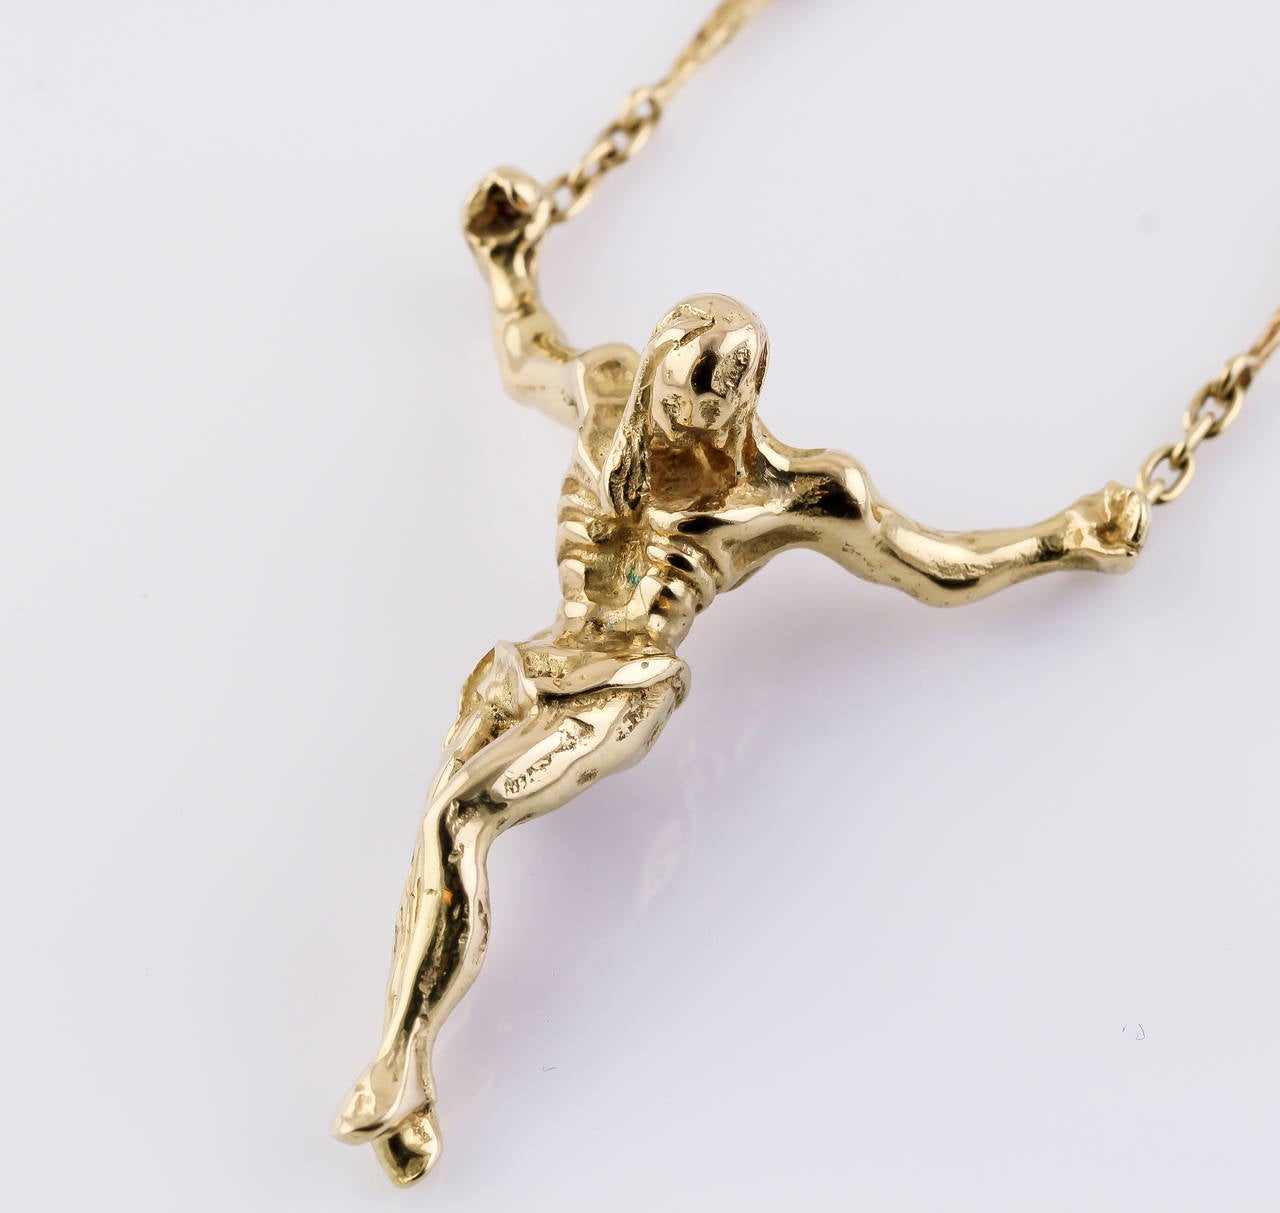 Unusual 18K yellow gold pendant necklace by Salvador Dali. The pendant is in the likeness of Christ, and is known as the 